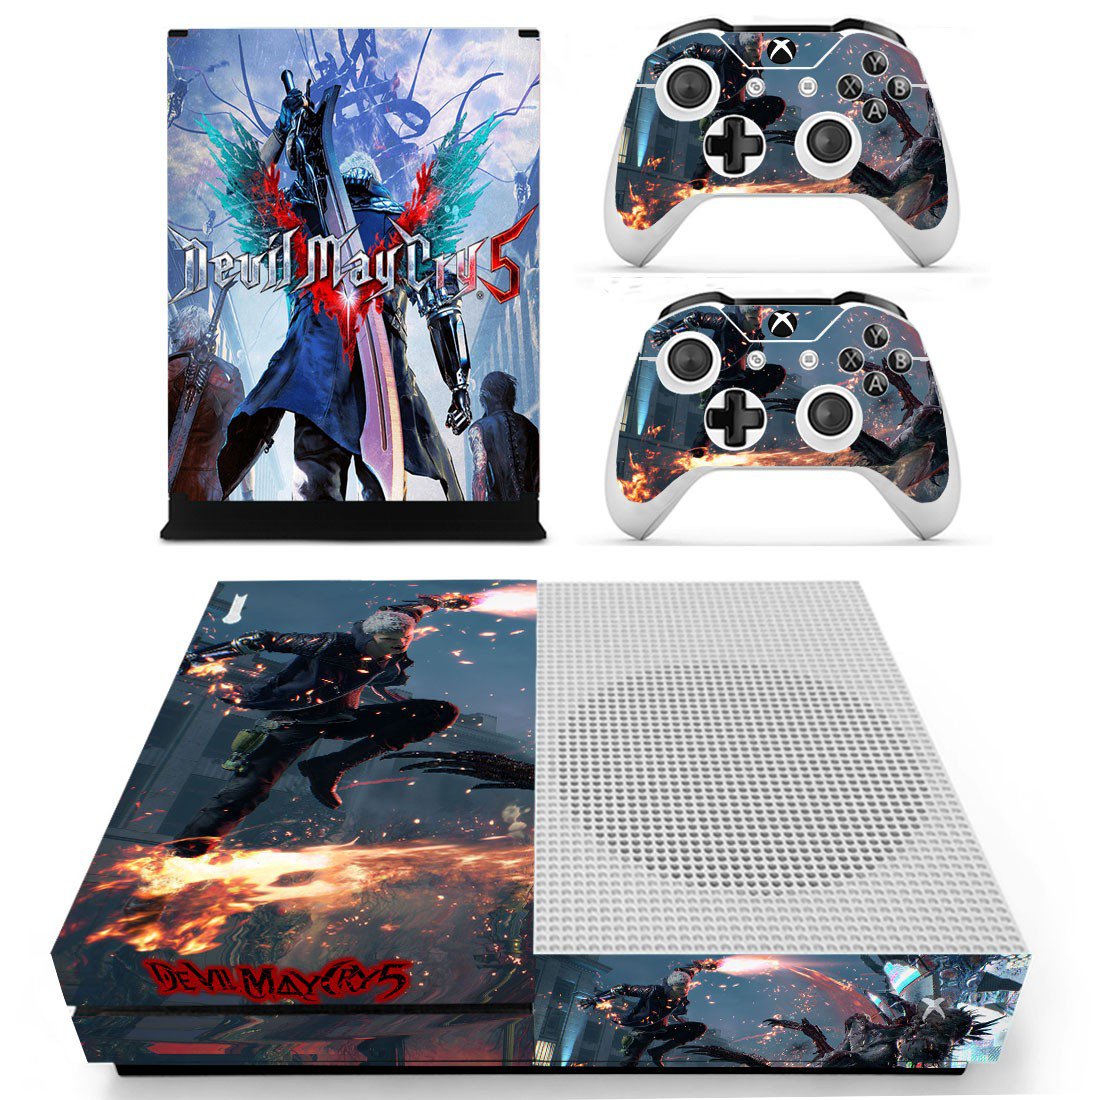 Xbox One S Skin Cover - Devil May Cry 5